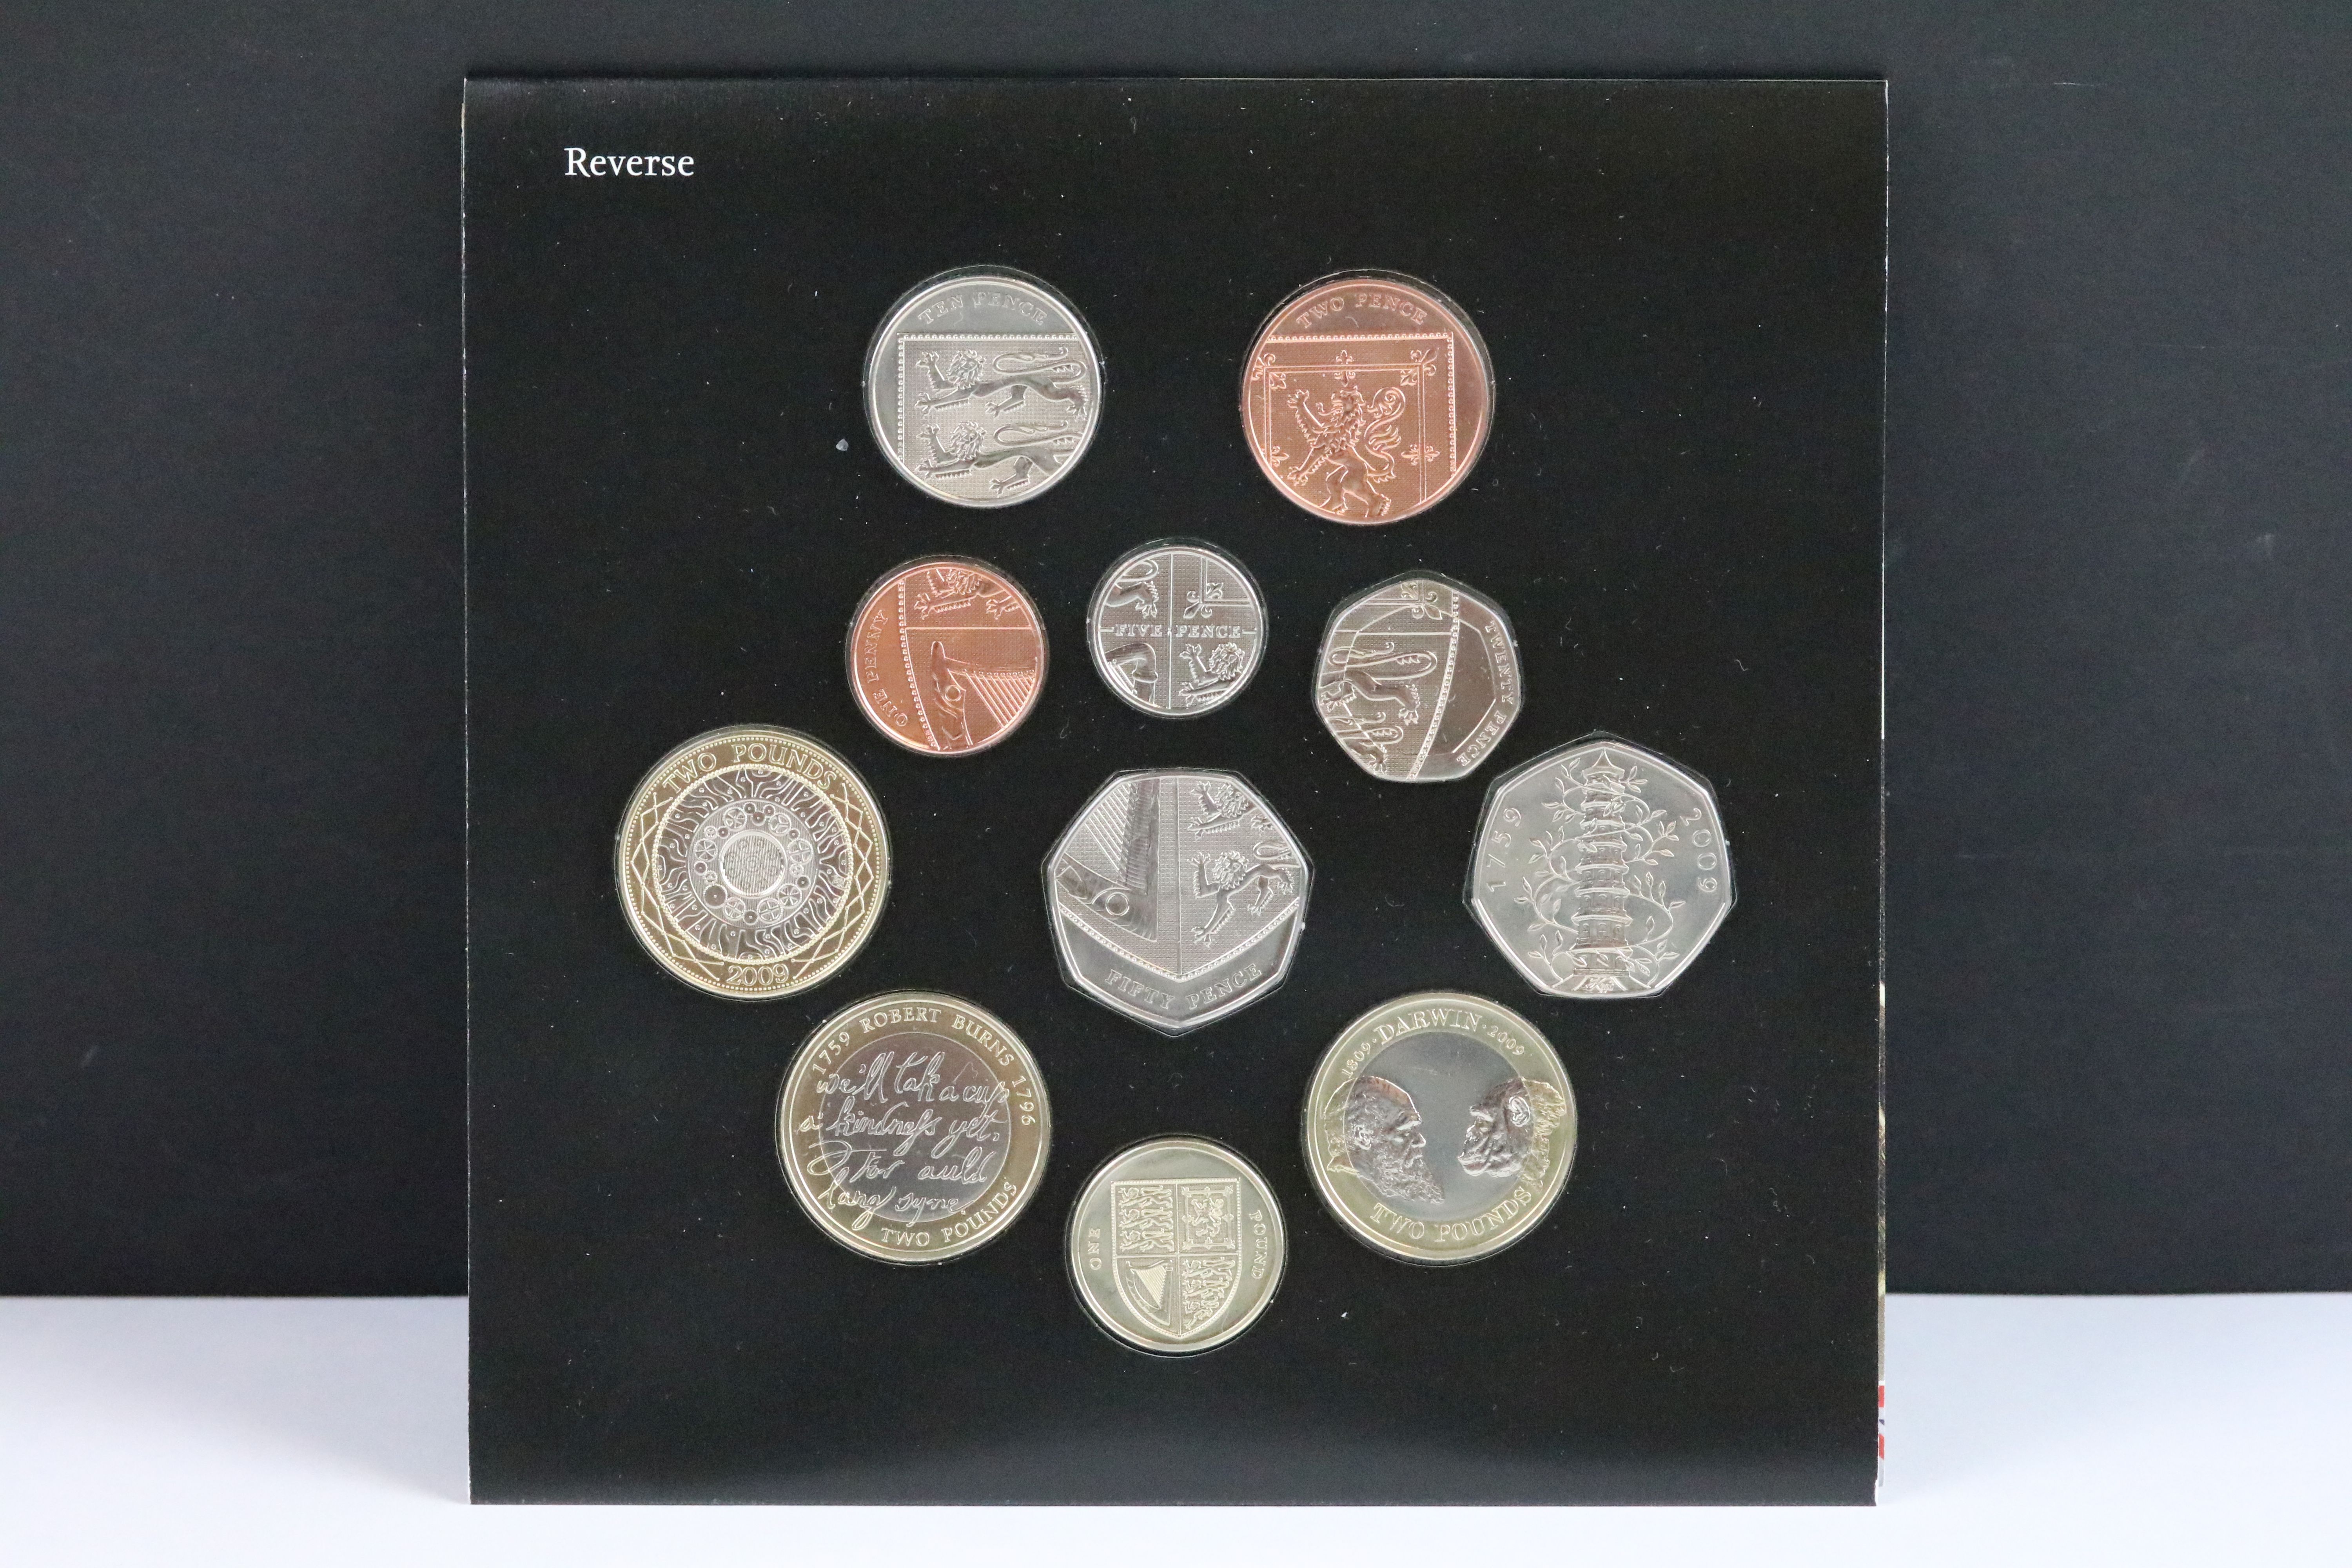 A British Royal Mint brilliant uncirculated 2009 coin set to include the Kew Gardens 50p coin. - Image 2 of 5